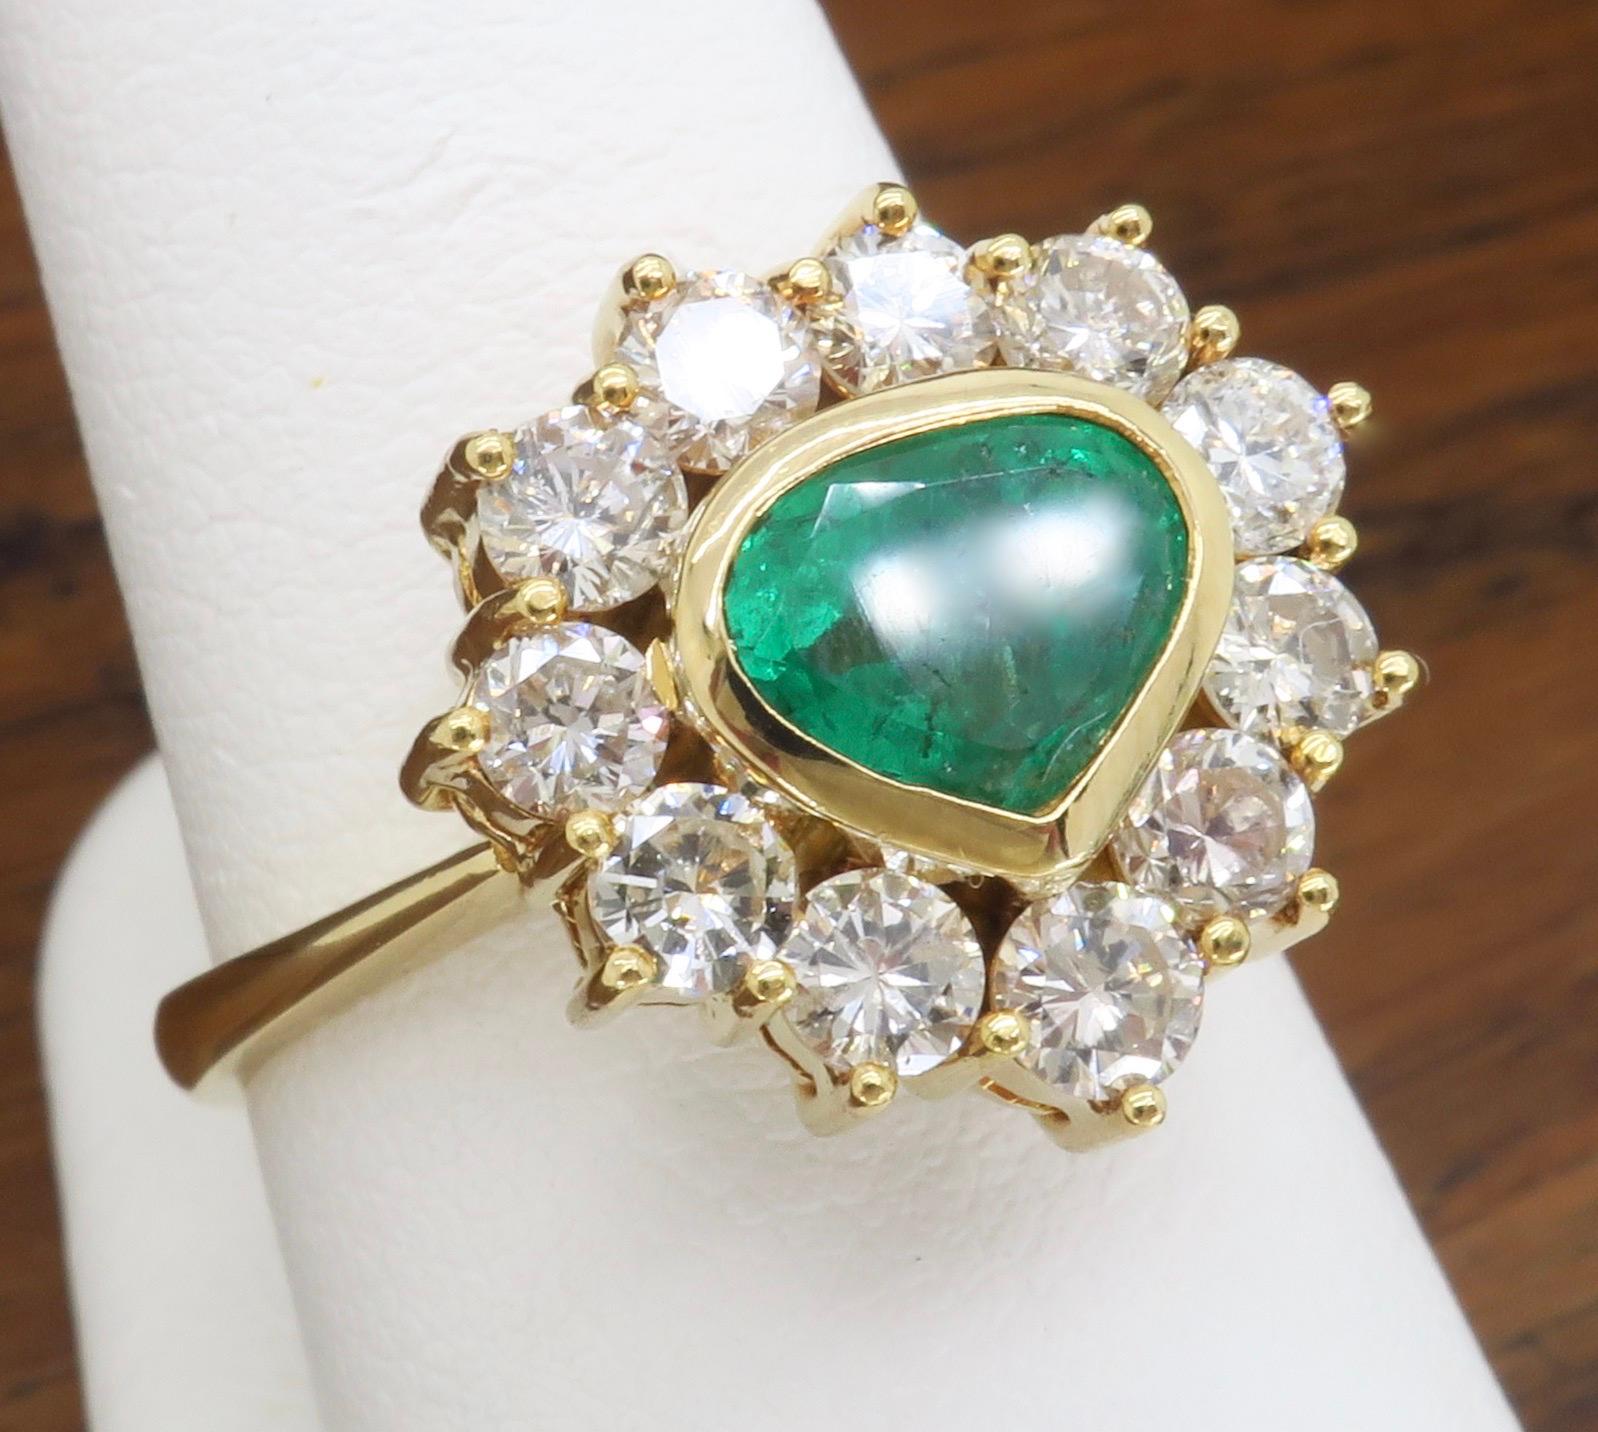 Unique 18k Yellow Gold Emerald & Diamond Halo Ring In Excellent Condition For Sale In Webster, NY